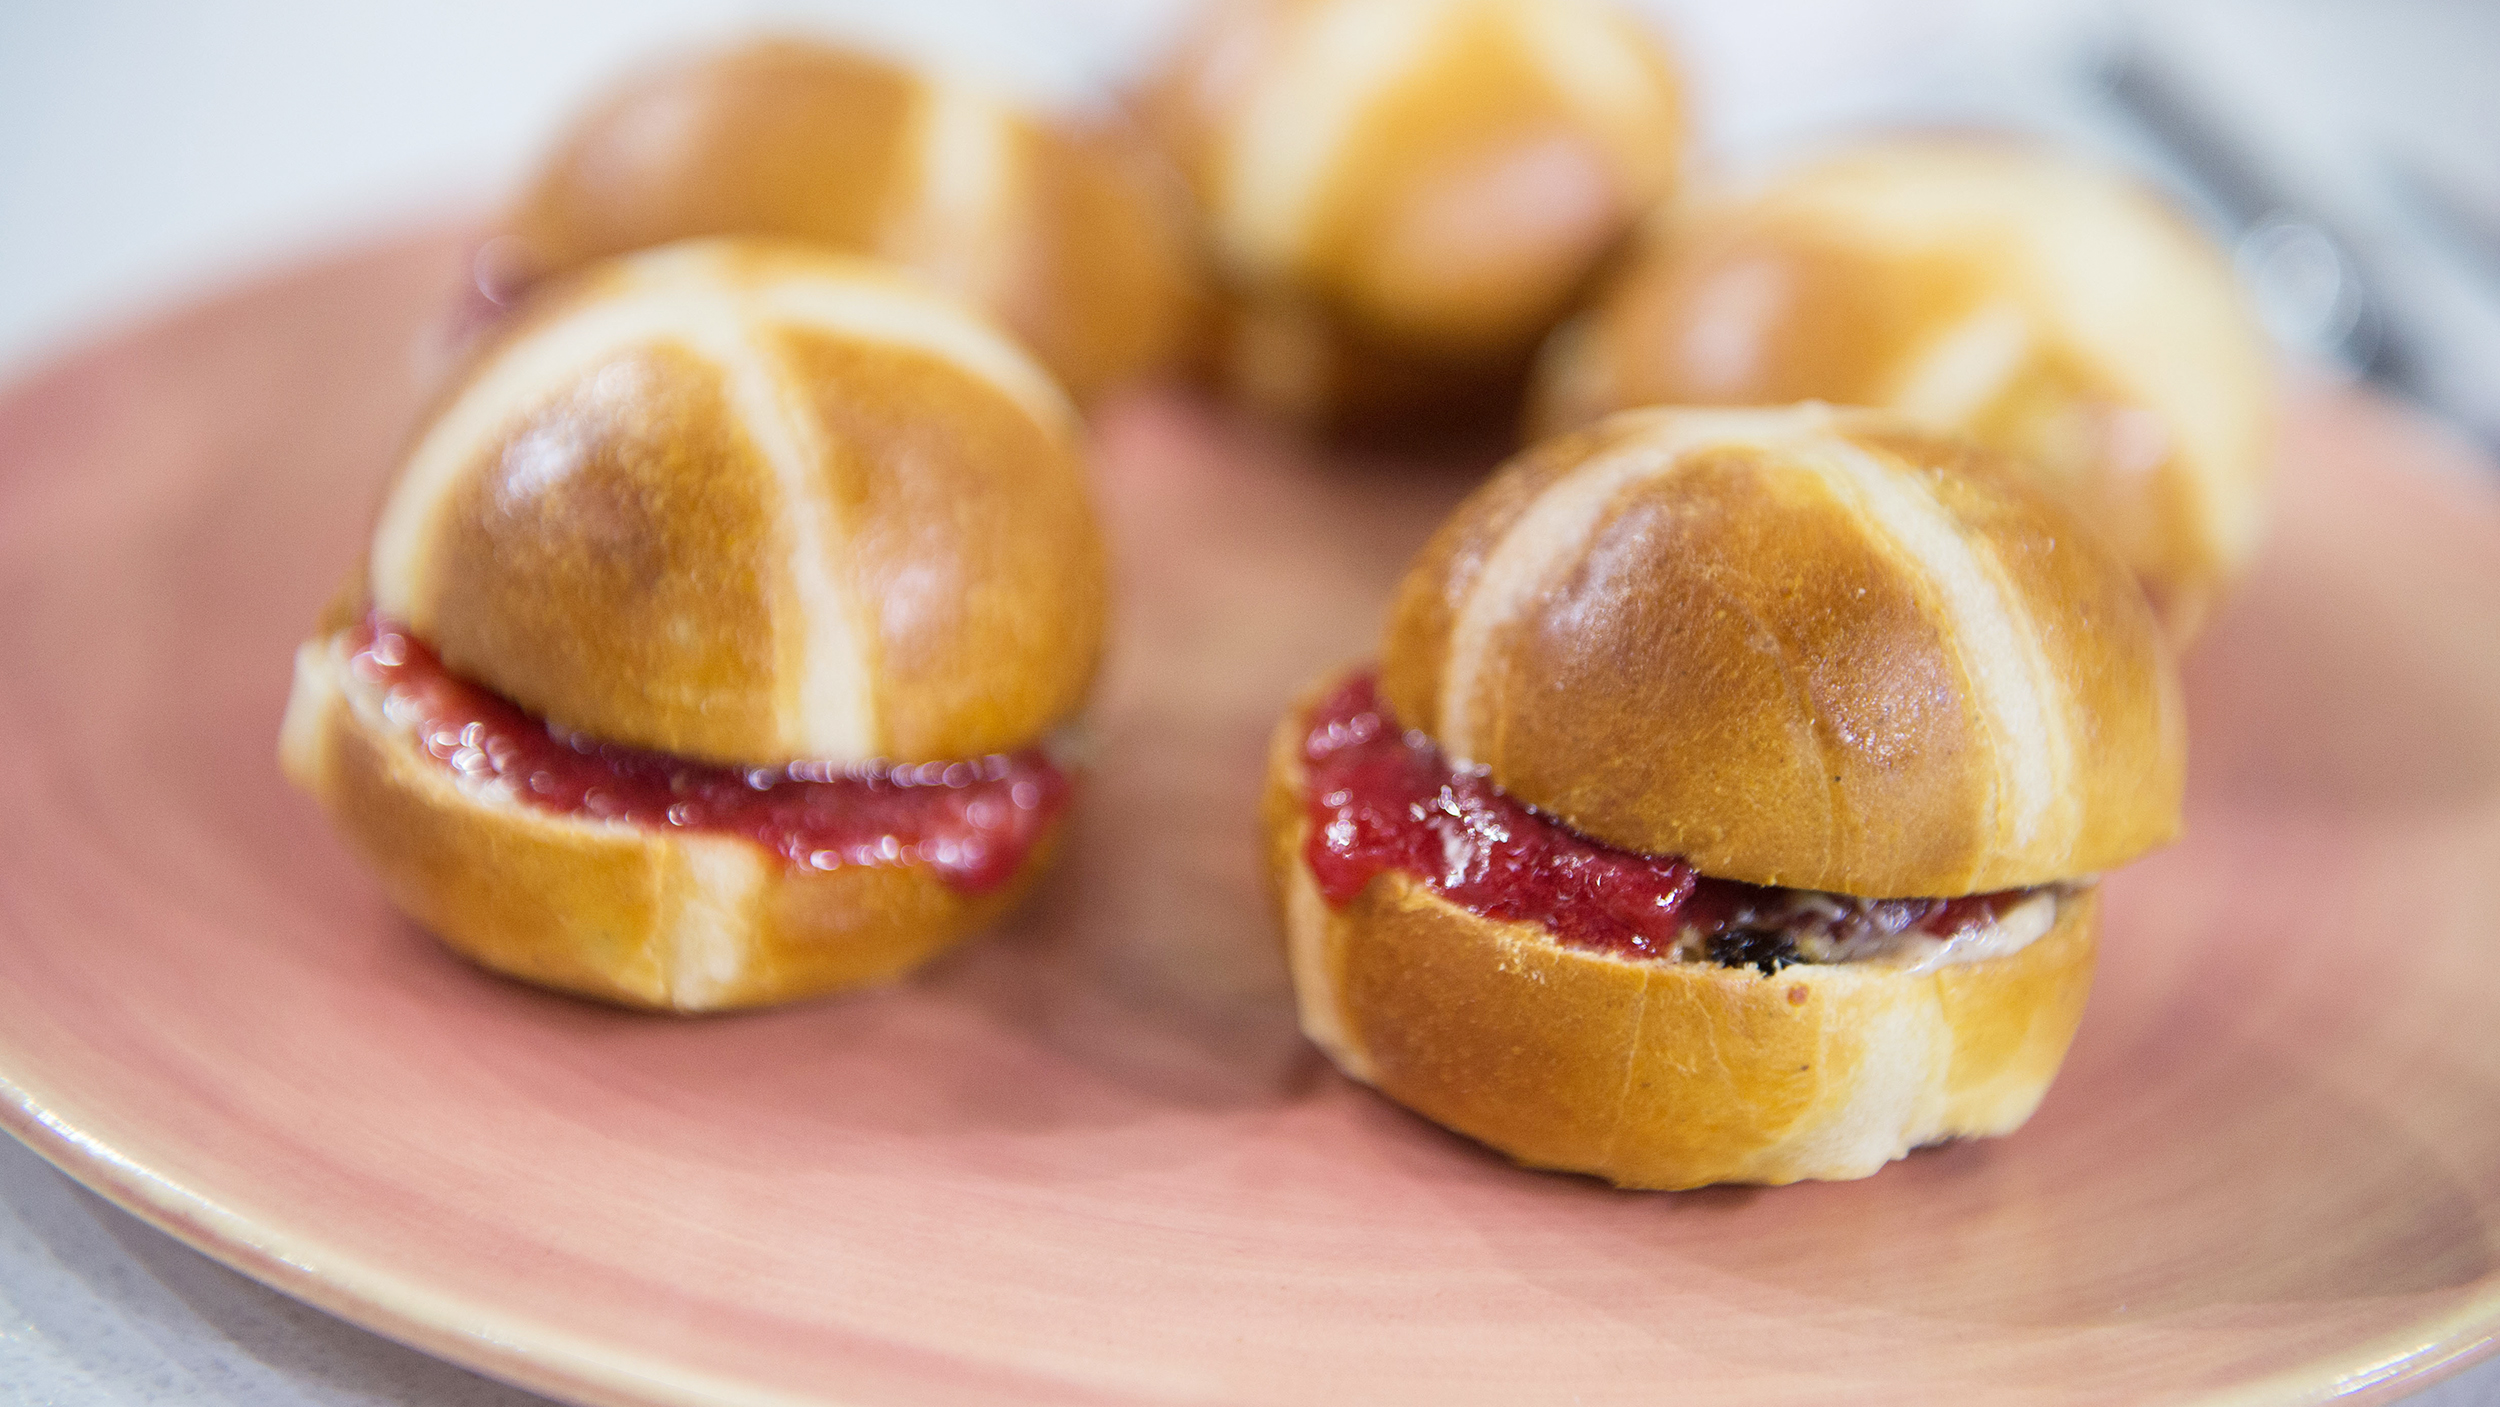 Hot Cross Buns with Spiced Butter and Strawberry Jam - TODAY.com